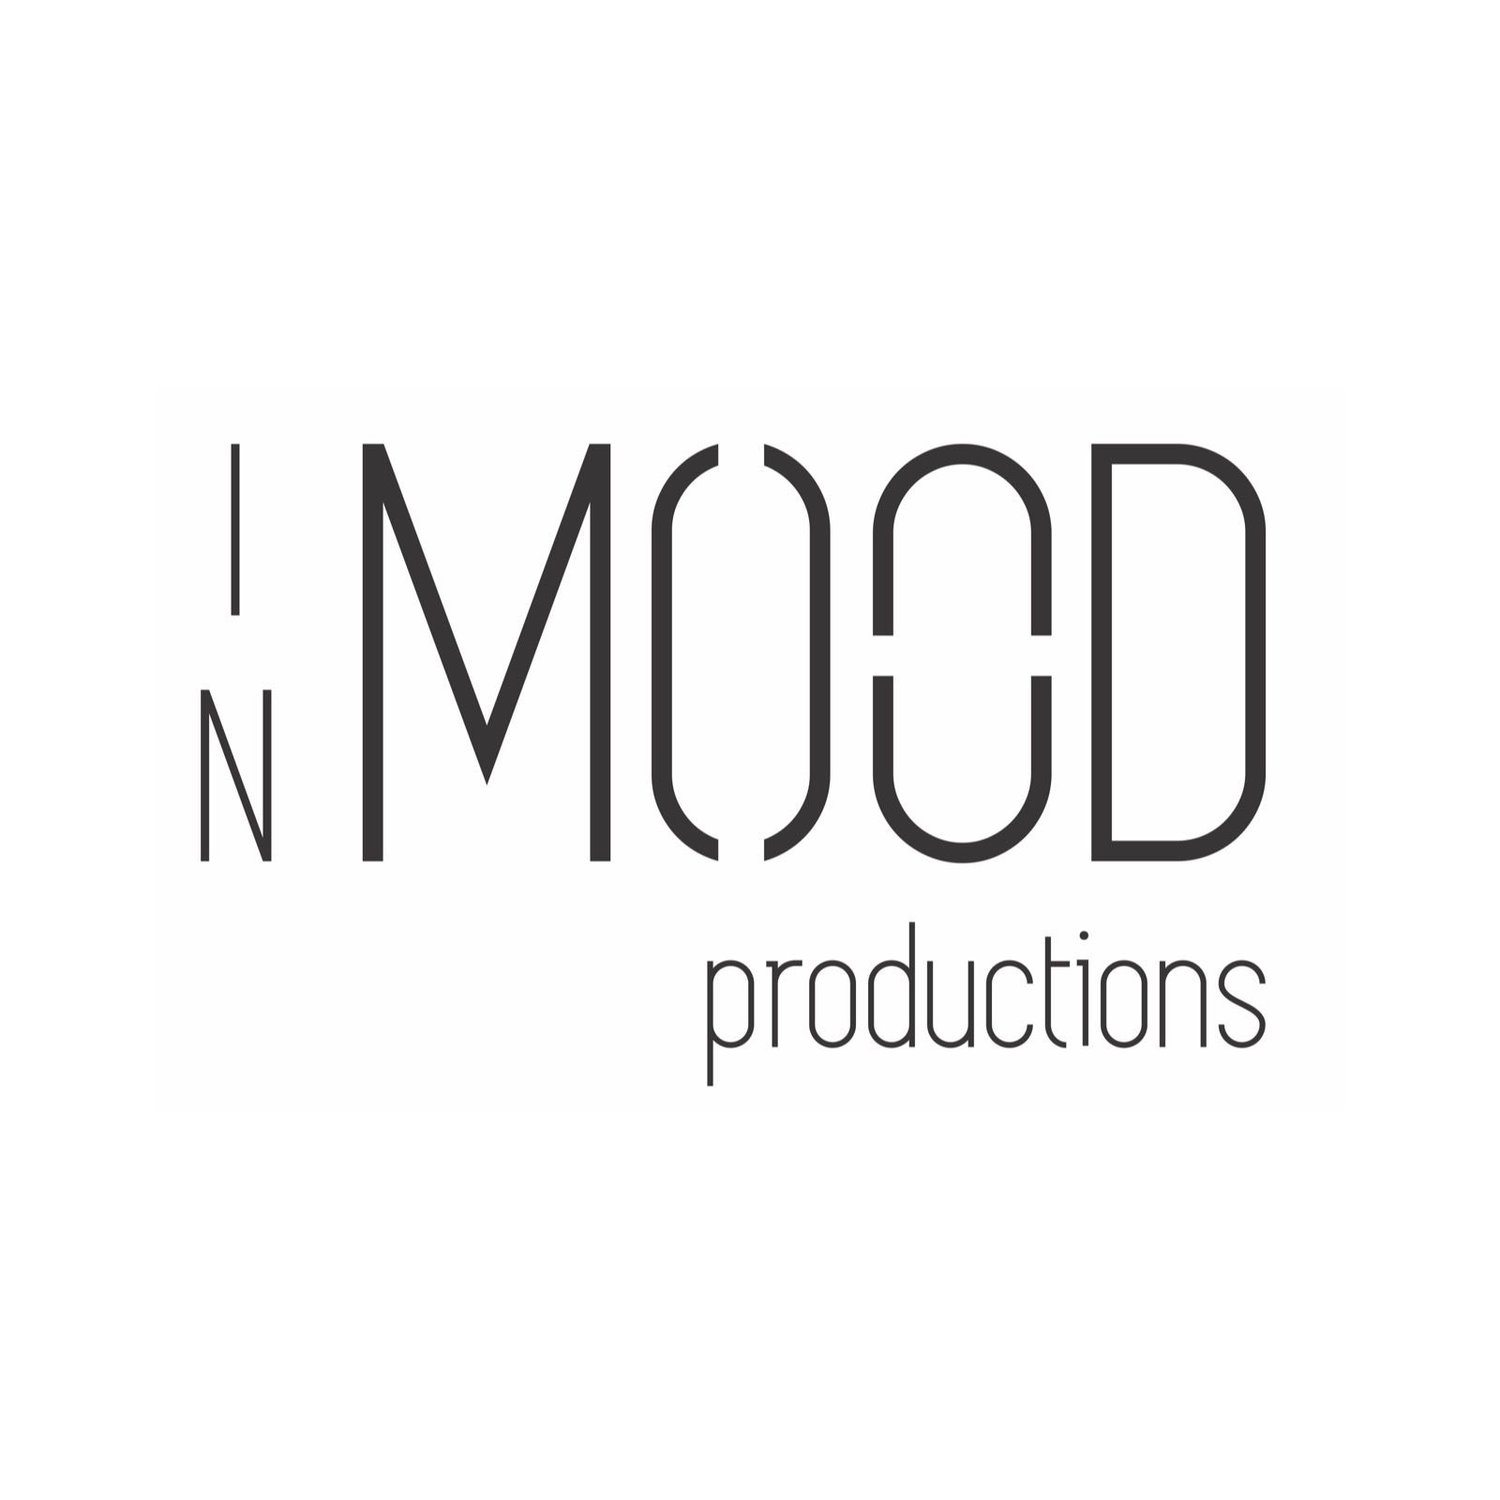 In Mood productions